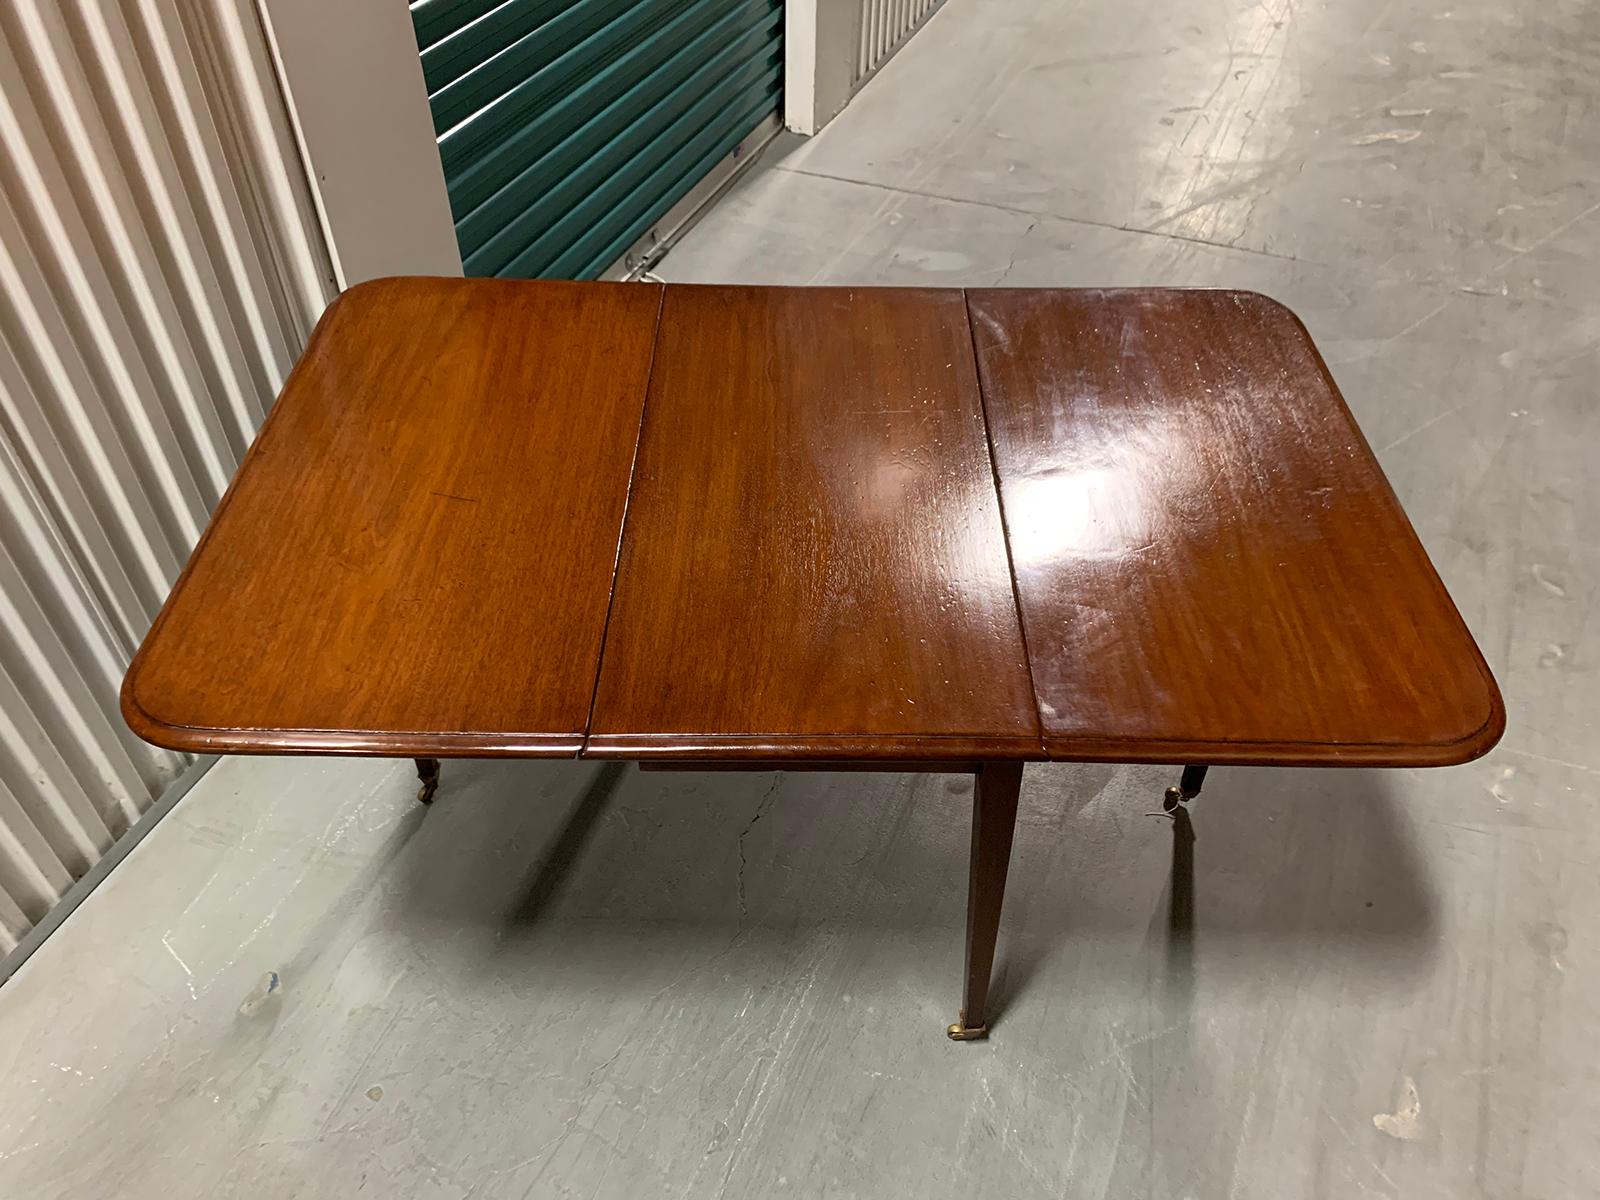 19th-20th Century Drop-Leaf Table For Sale 4